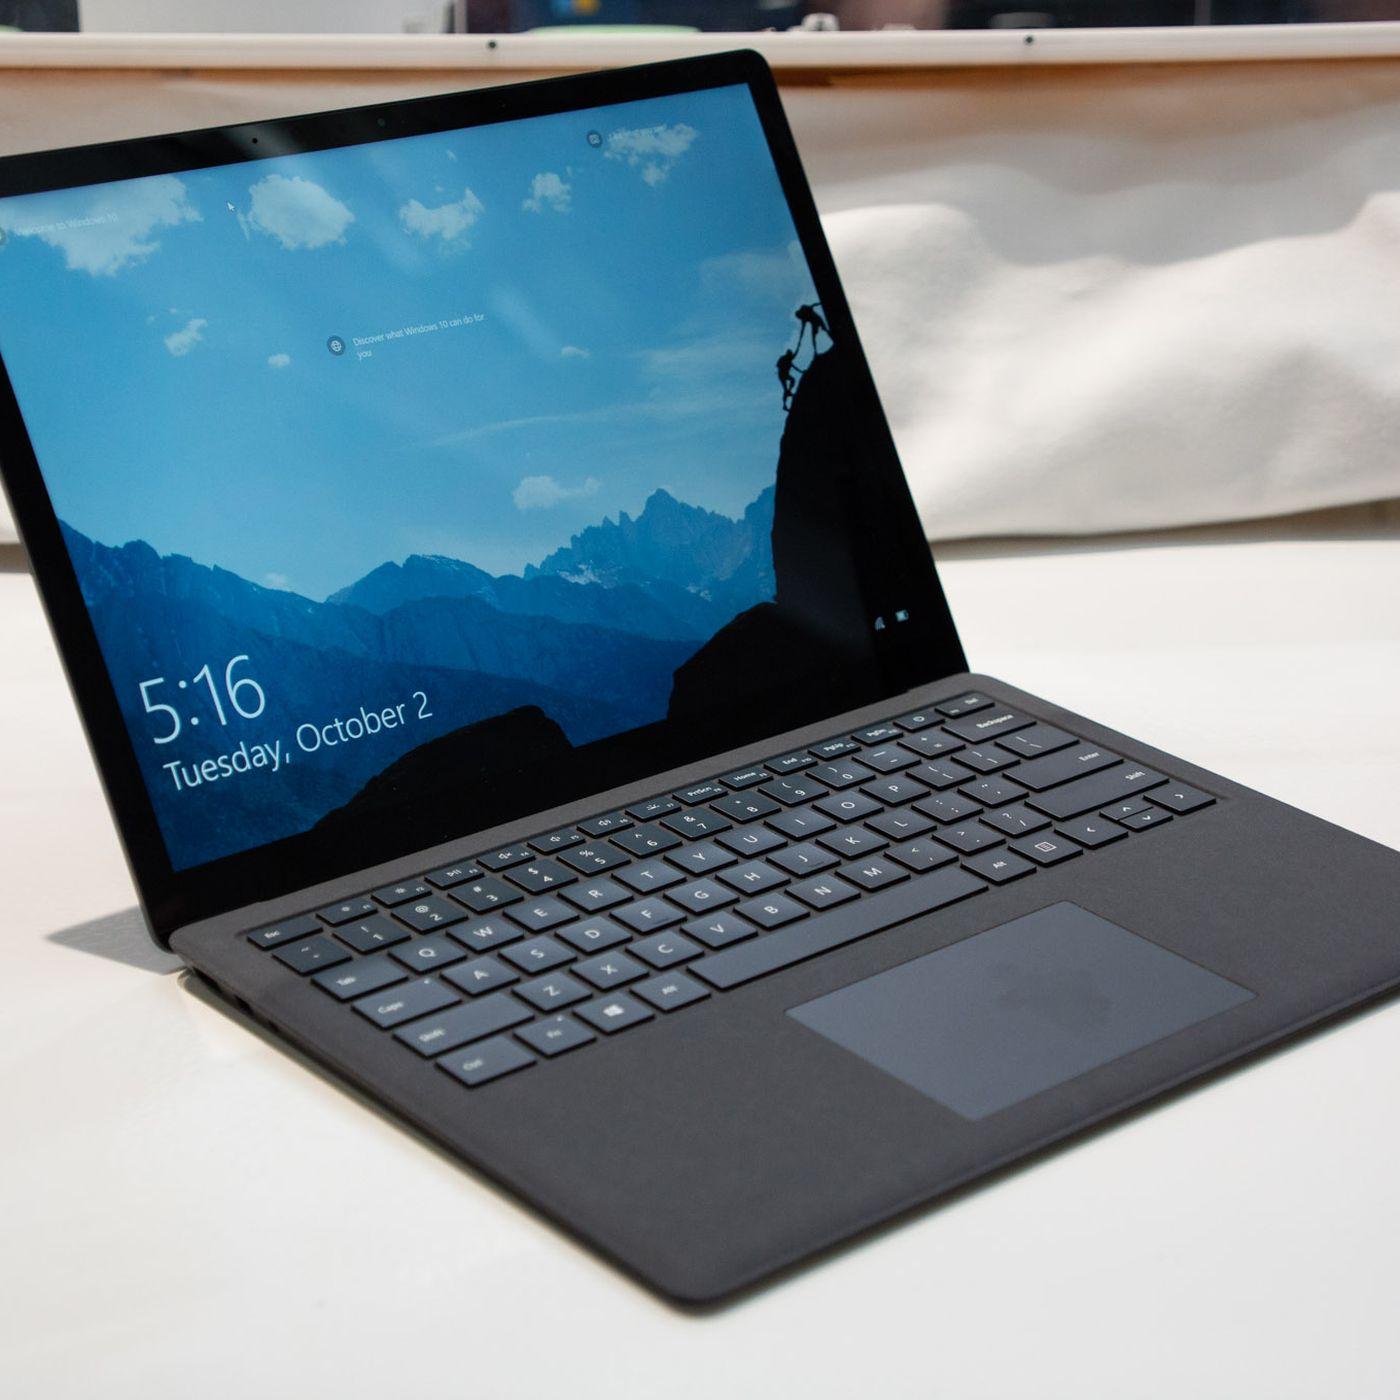 Microsoft Surface 2 Logo - First look at Microsoft's new matte black Surface Laptop 2 - The Verge